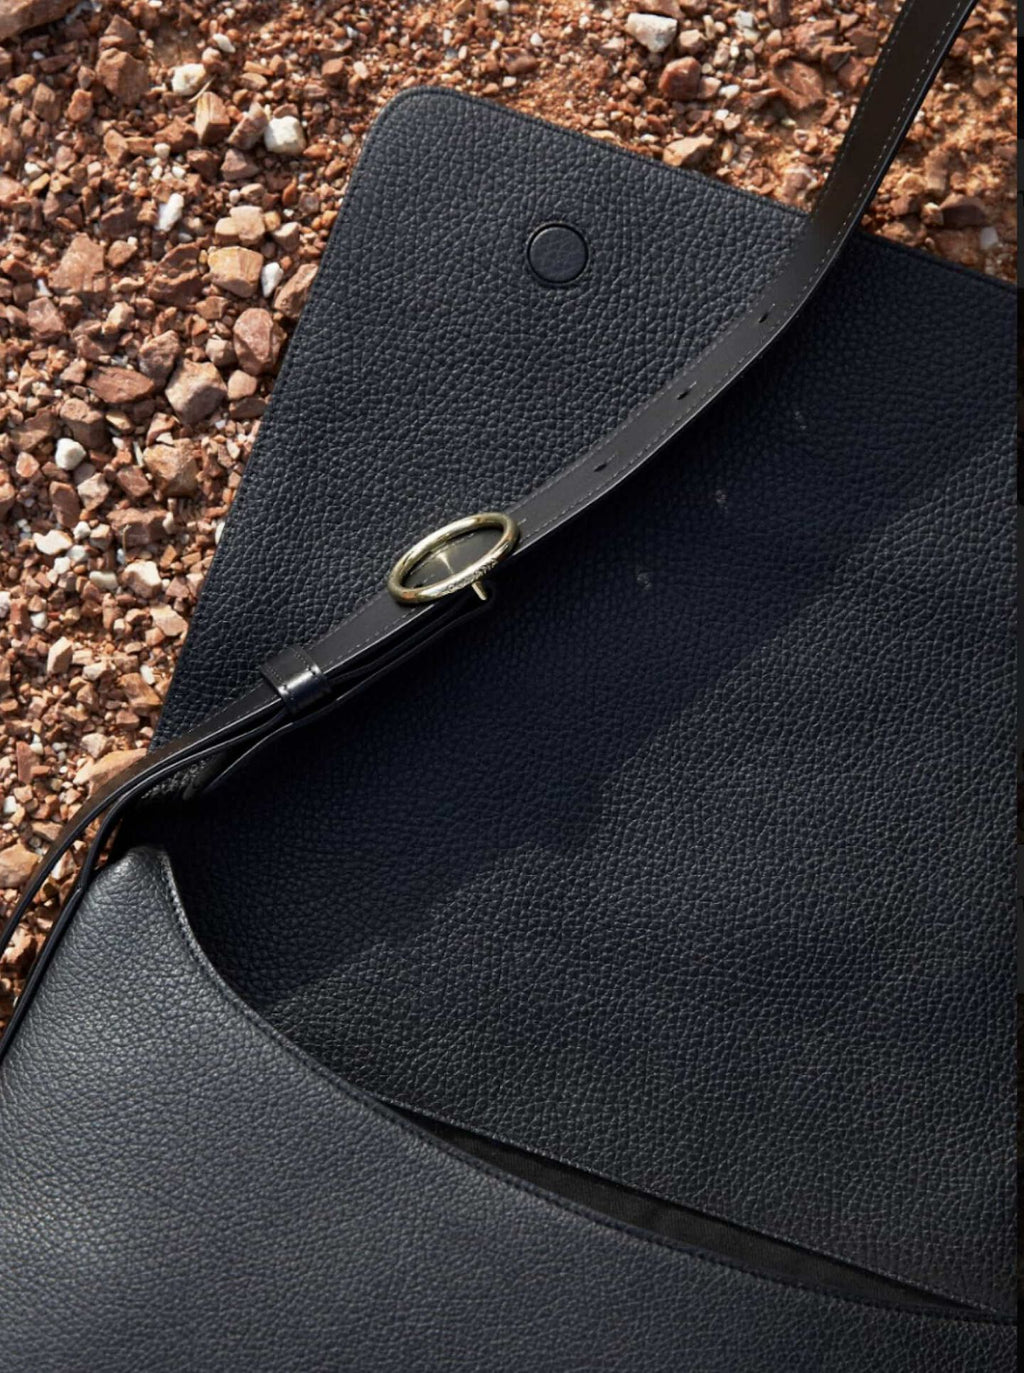 Close-up of a bag with a strap and metallic buckle on a textured surface.